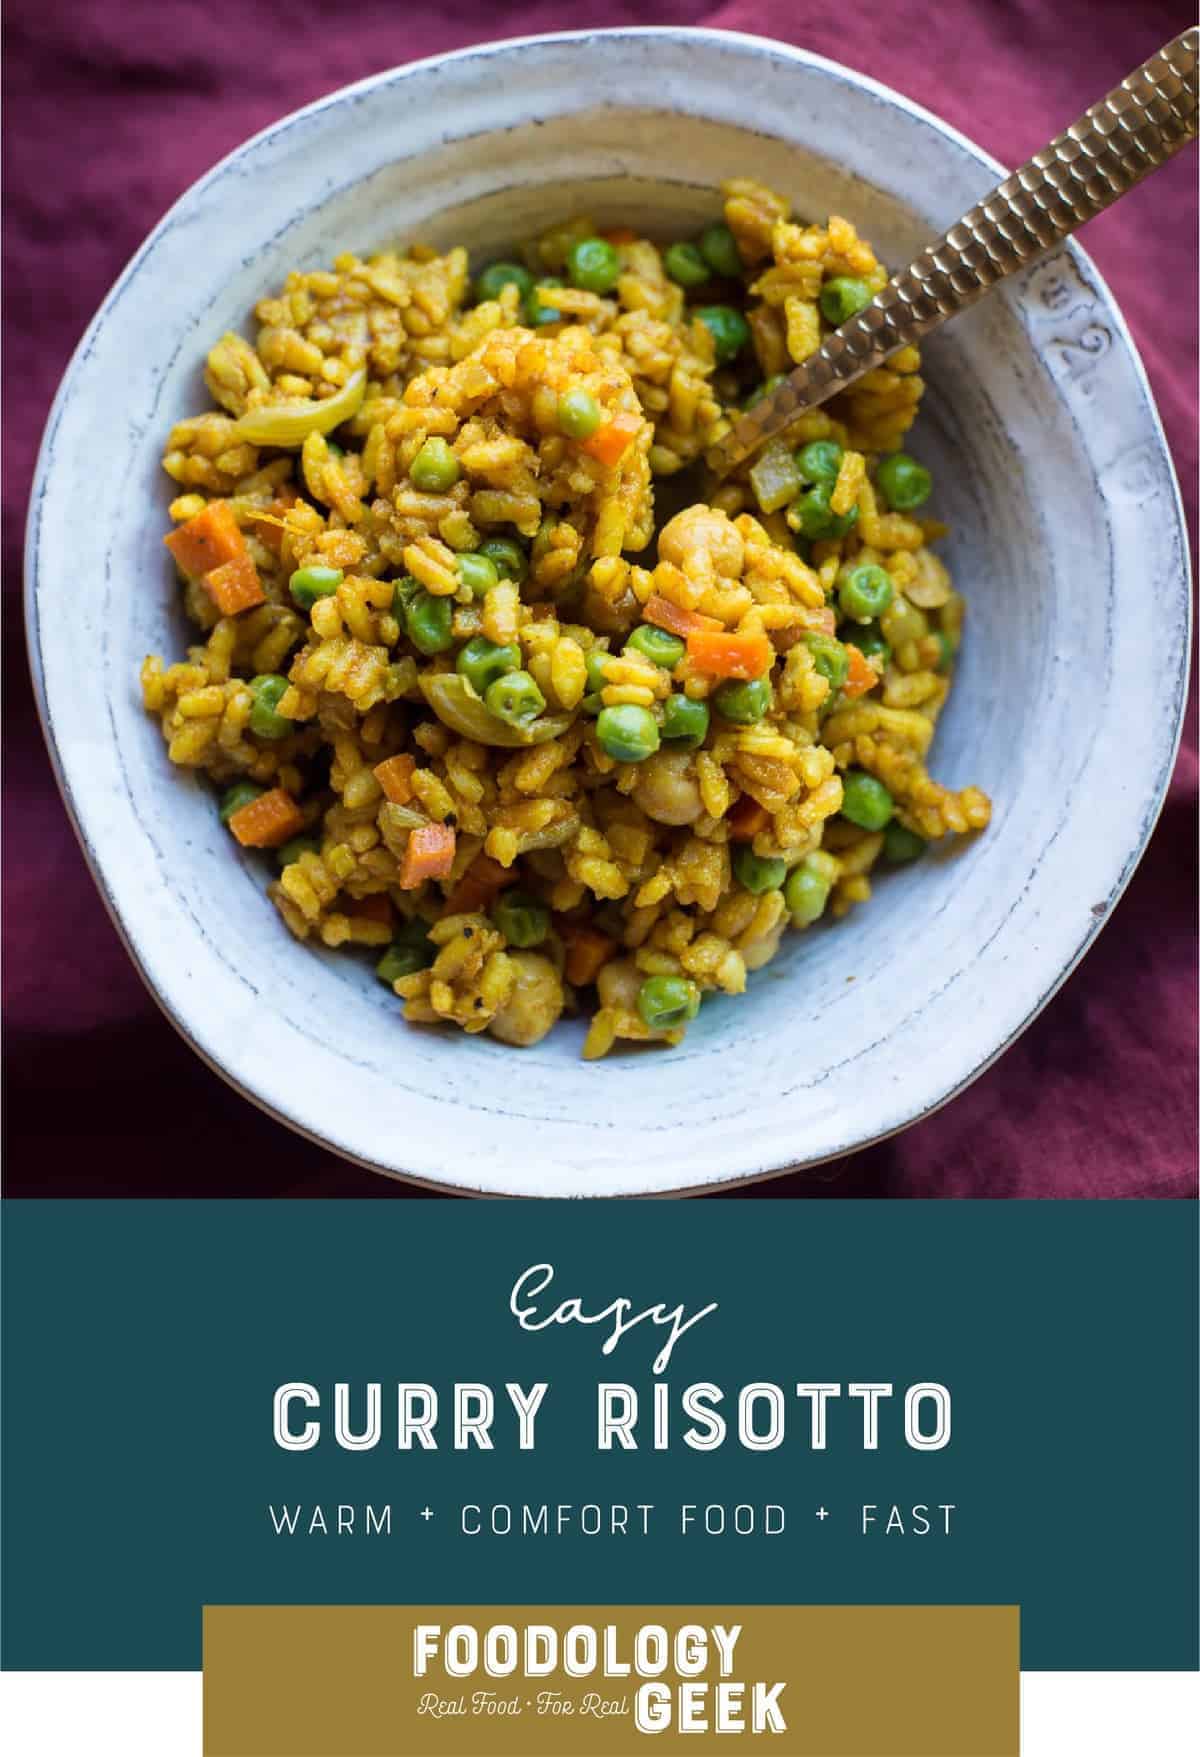 Easy Curry Risotto pinterest image by foodology geek